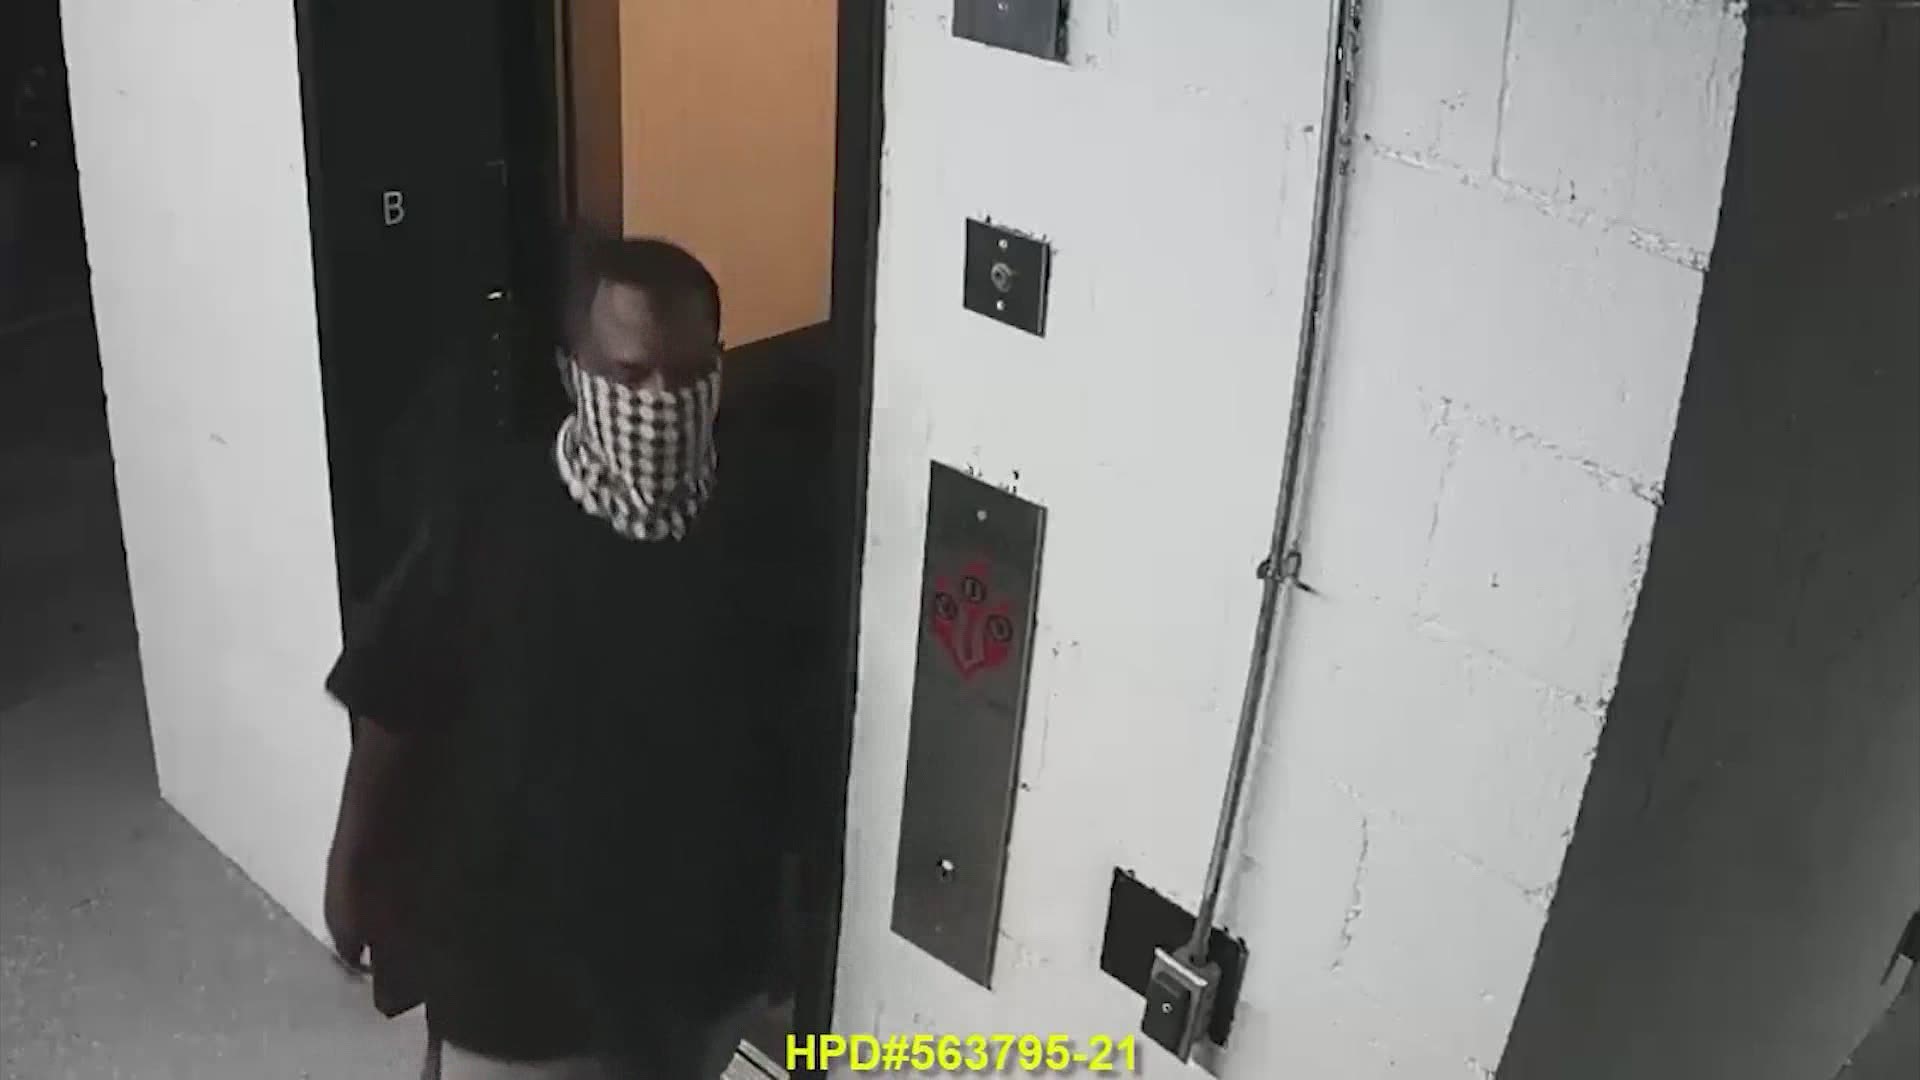 Police posted surveillance video of the suspect who is accused of robbing and kidnapping an older woman working alone at an Uptown office building.